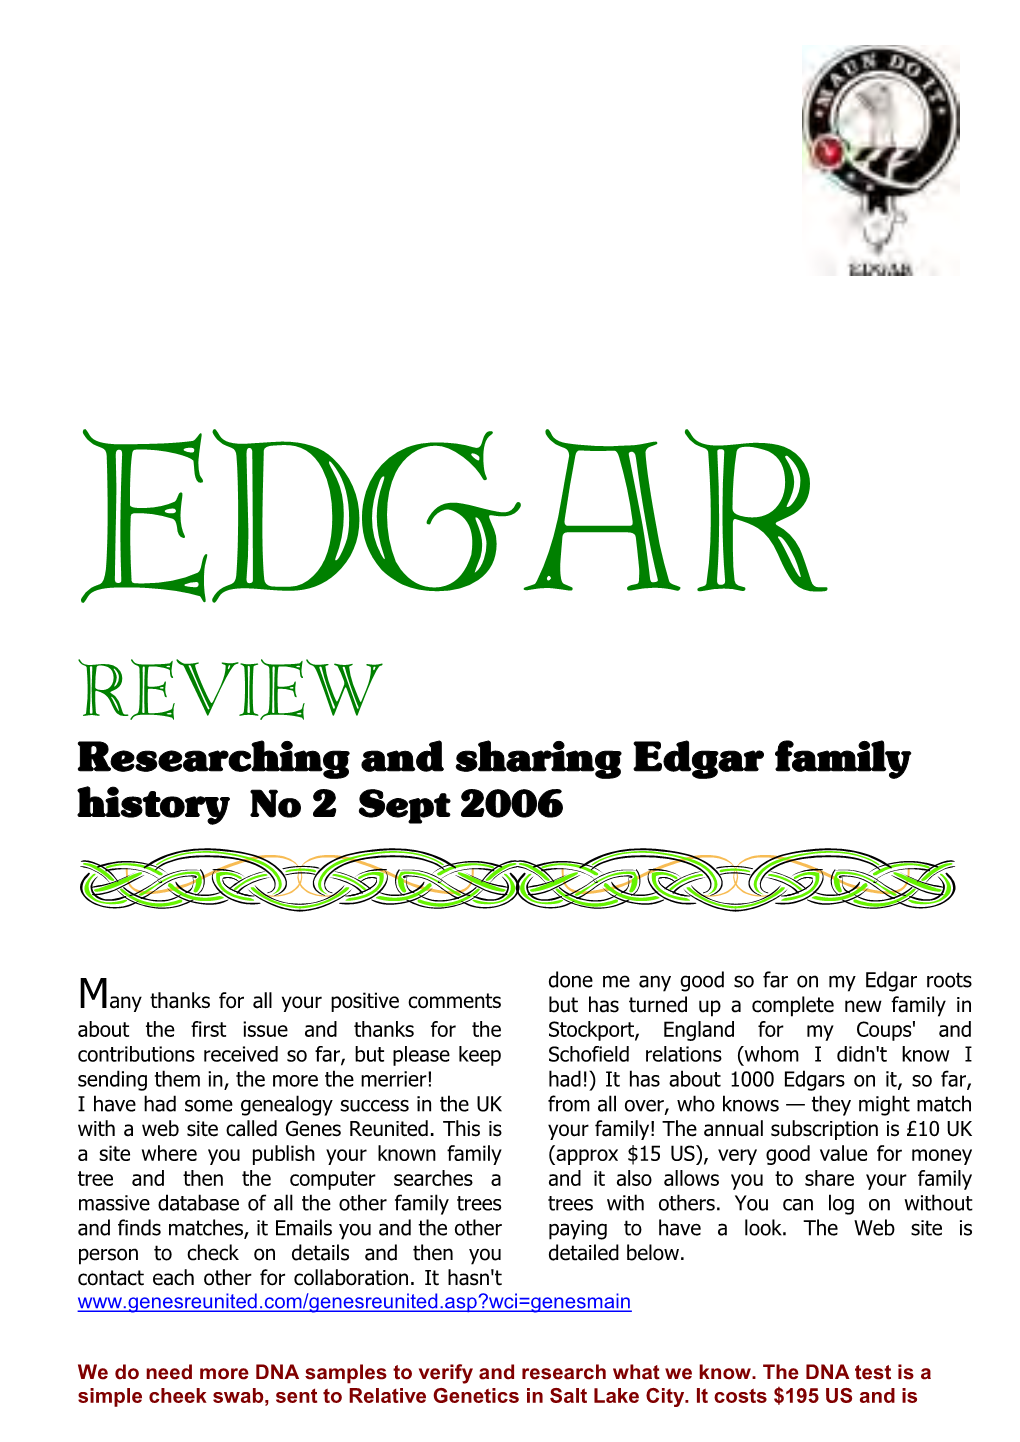 REVIEW Researching and Sharing Edgar Family History No 2 Sept 2006